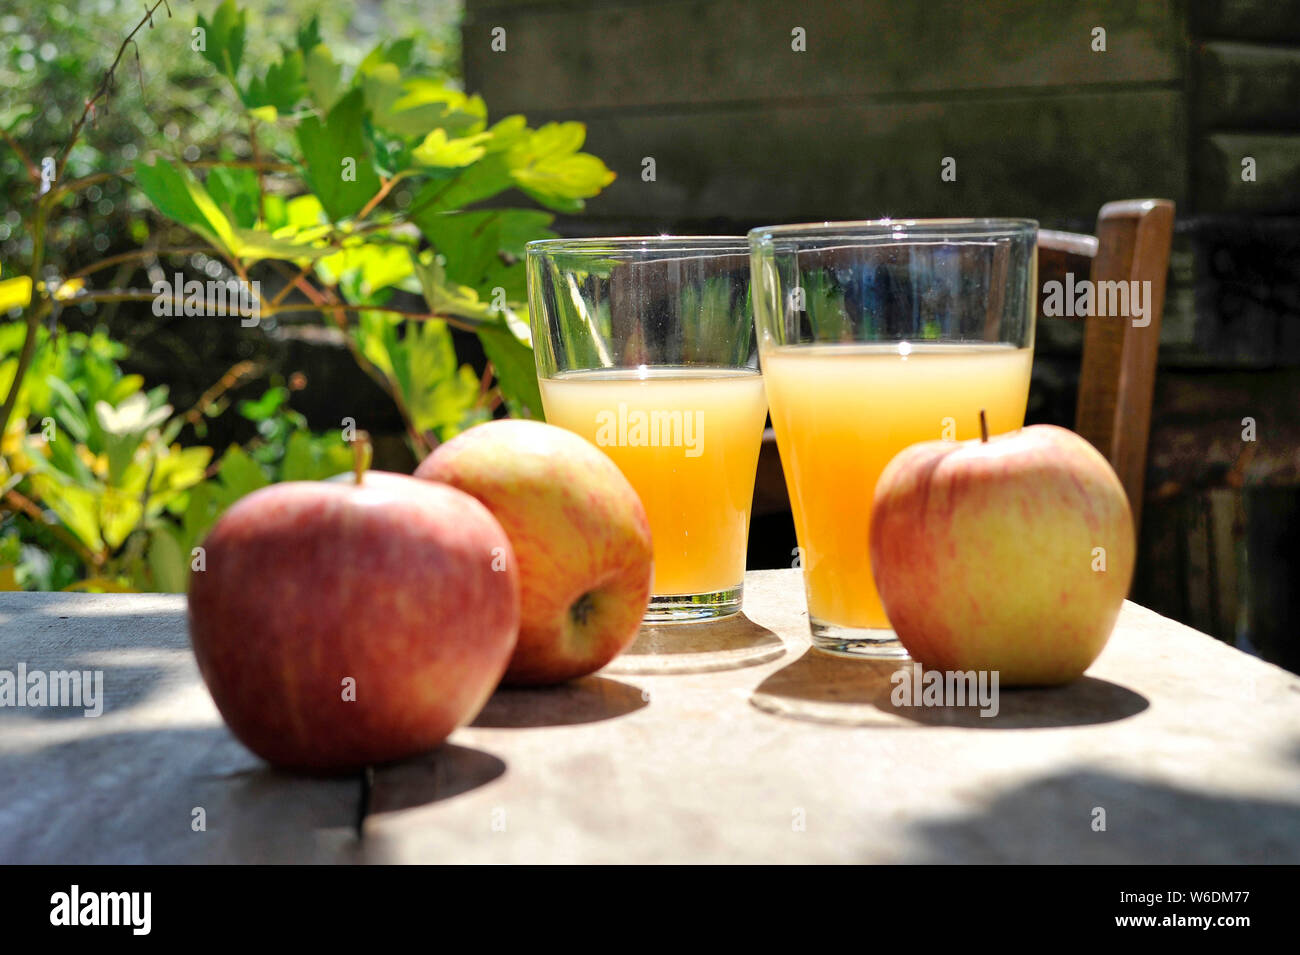 Apples and glasses of apple juice. NOTICE: Authorization for any editorial use respecting the caption and context of the image and not infringing or d Stock Photo